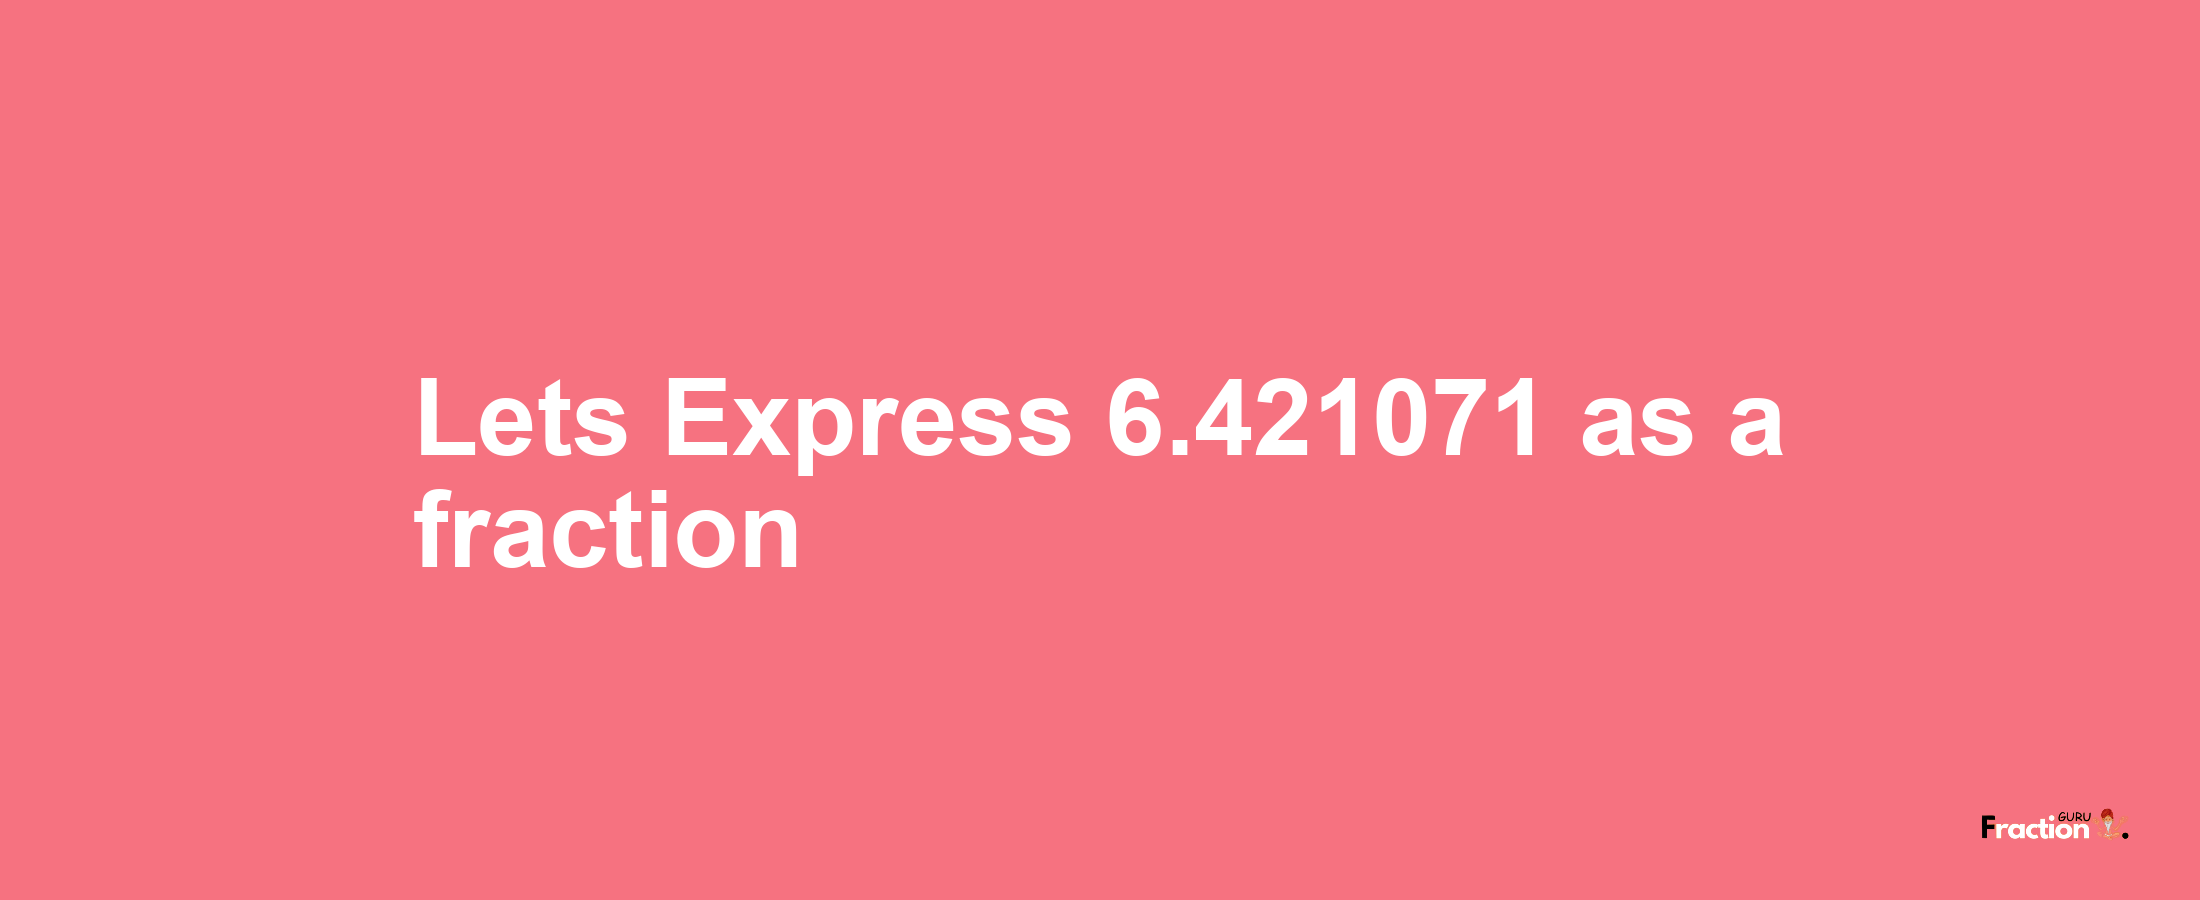 Lets Express 6.421071 as afraction